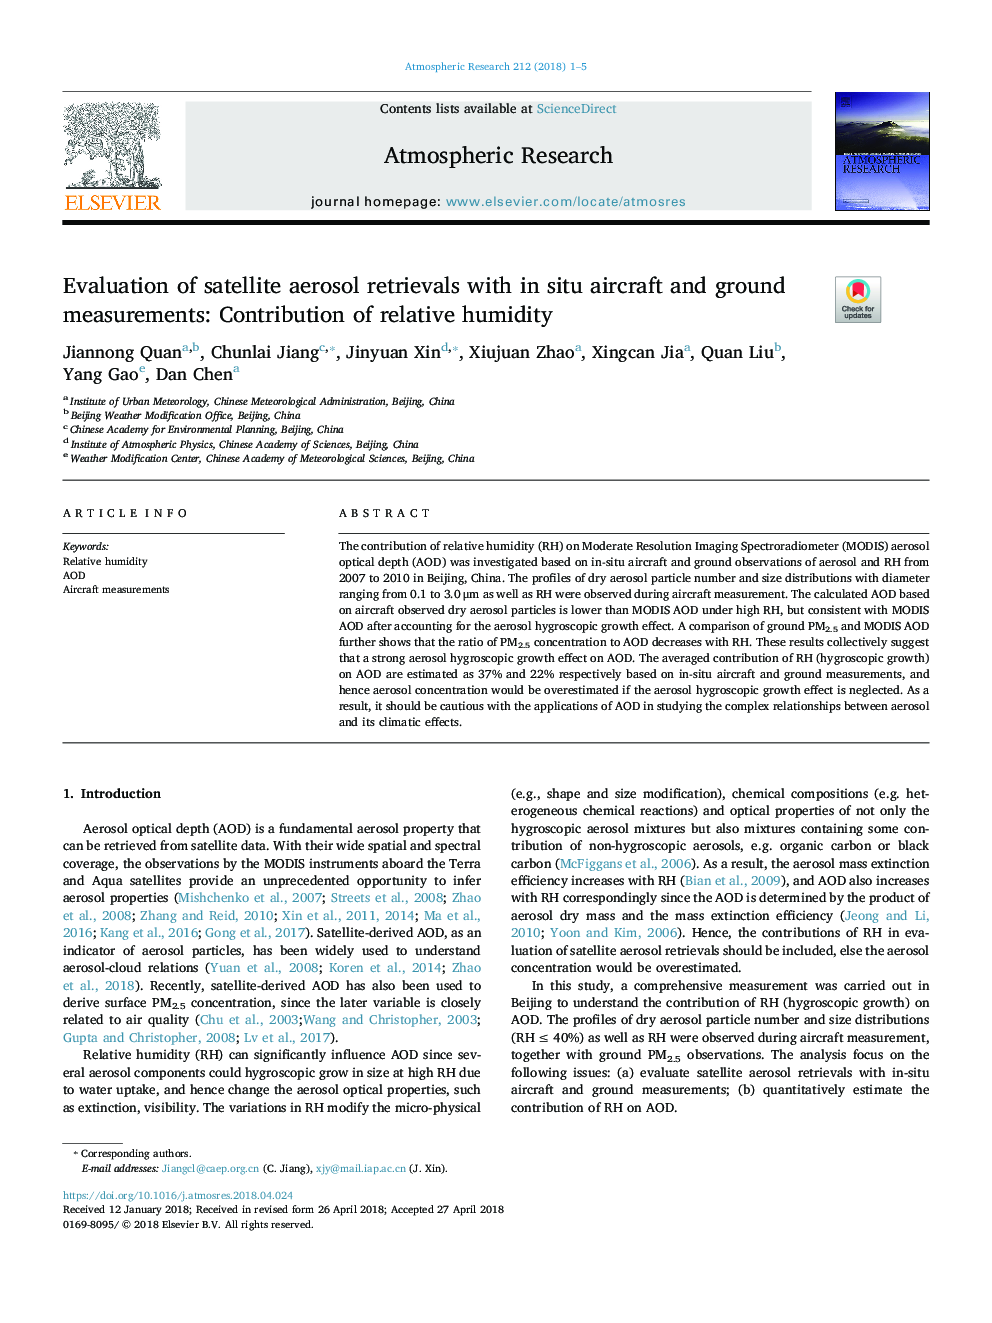 Evaluation of satellite aerosol retrievals with in situ aircraft and ground measurements: Contribution of relative humidity